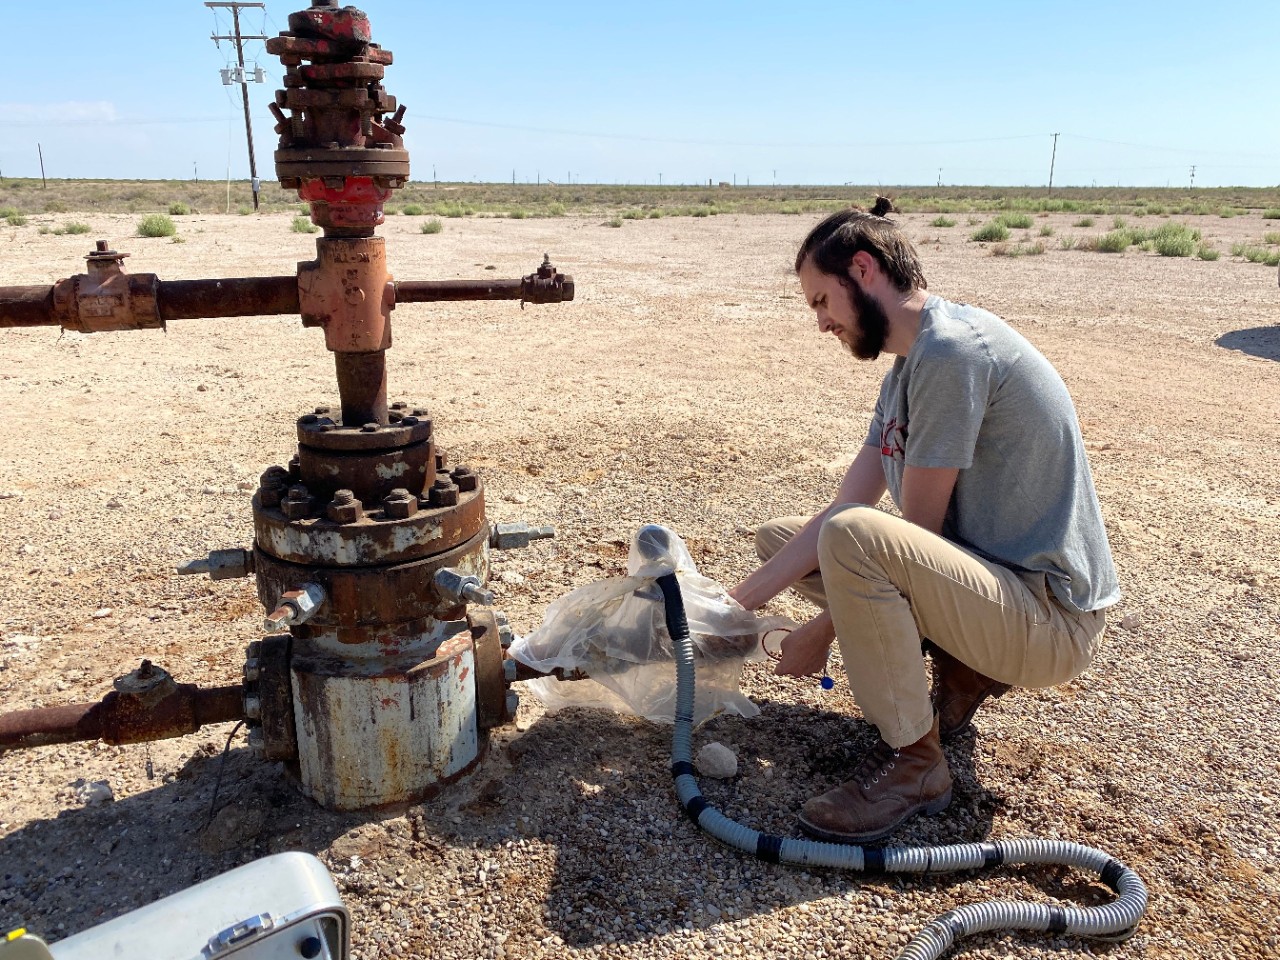 A UC student kneels over a rusty abandoned gas well to measure methane emissions.